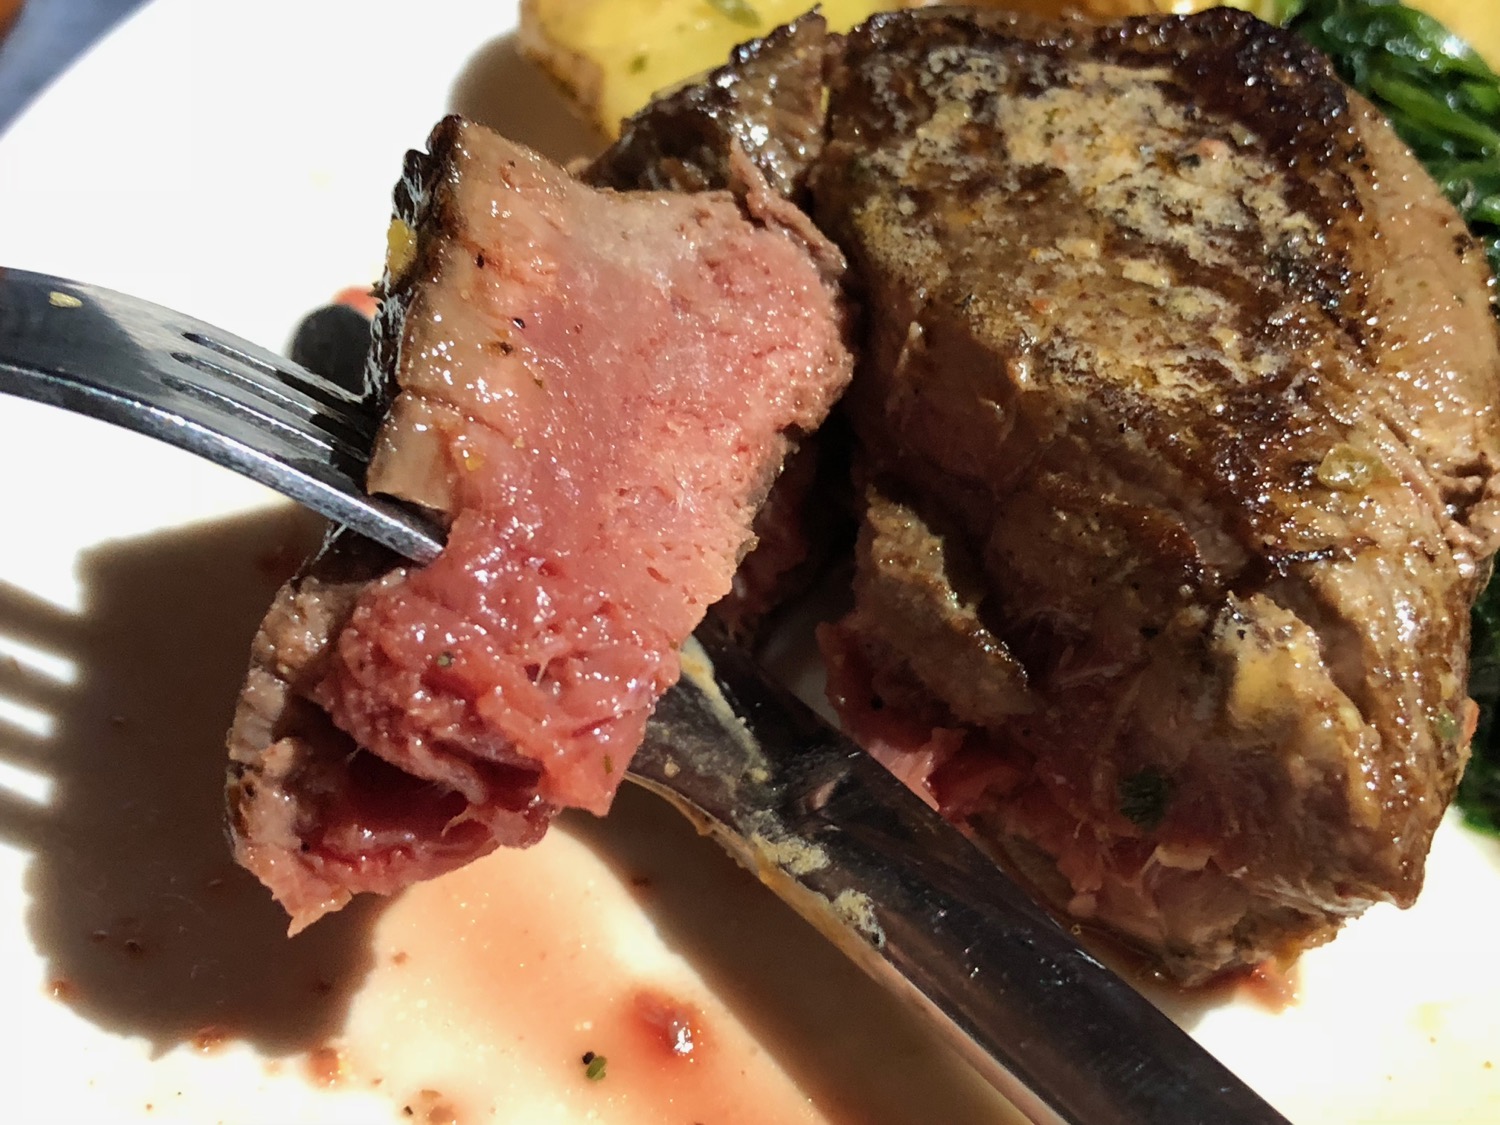 a fork and knife on a piece of meat